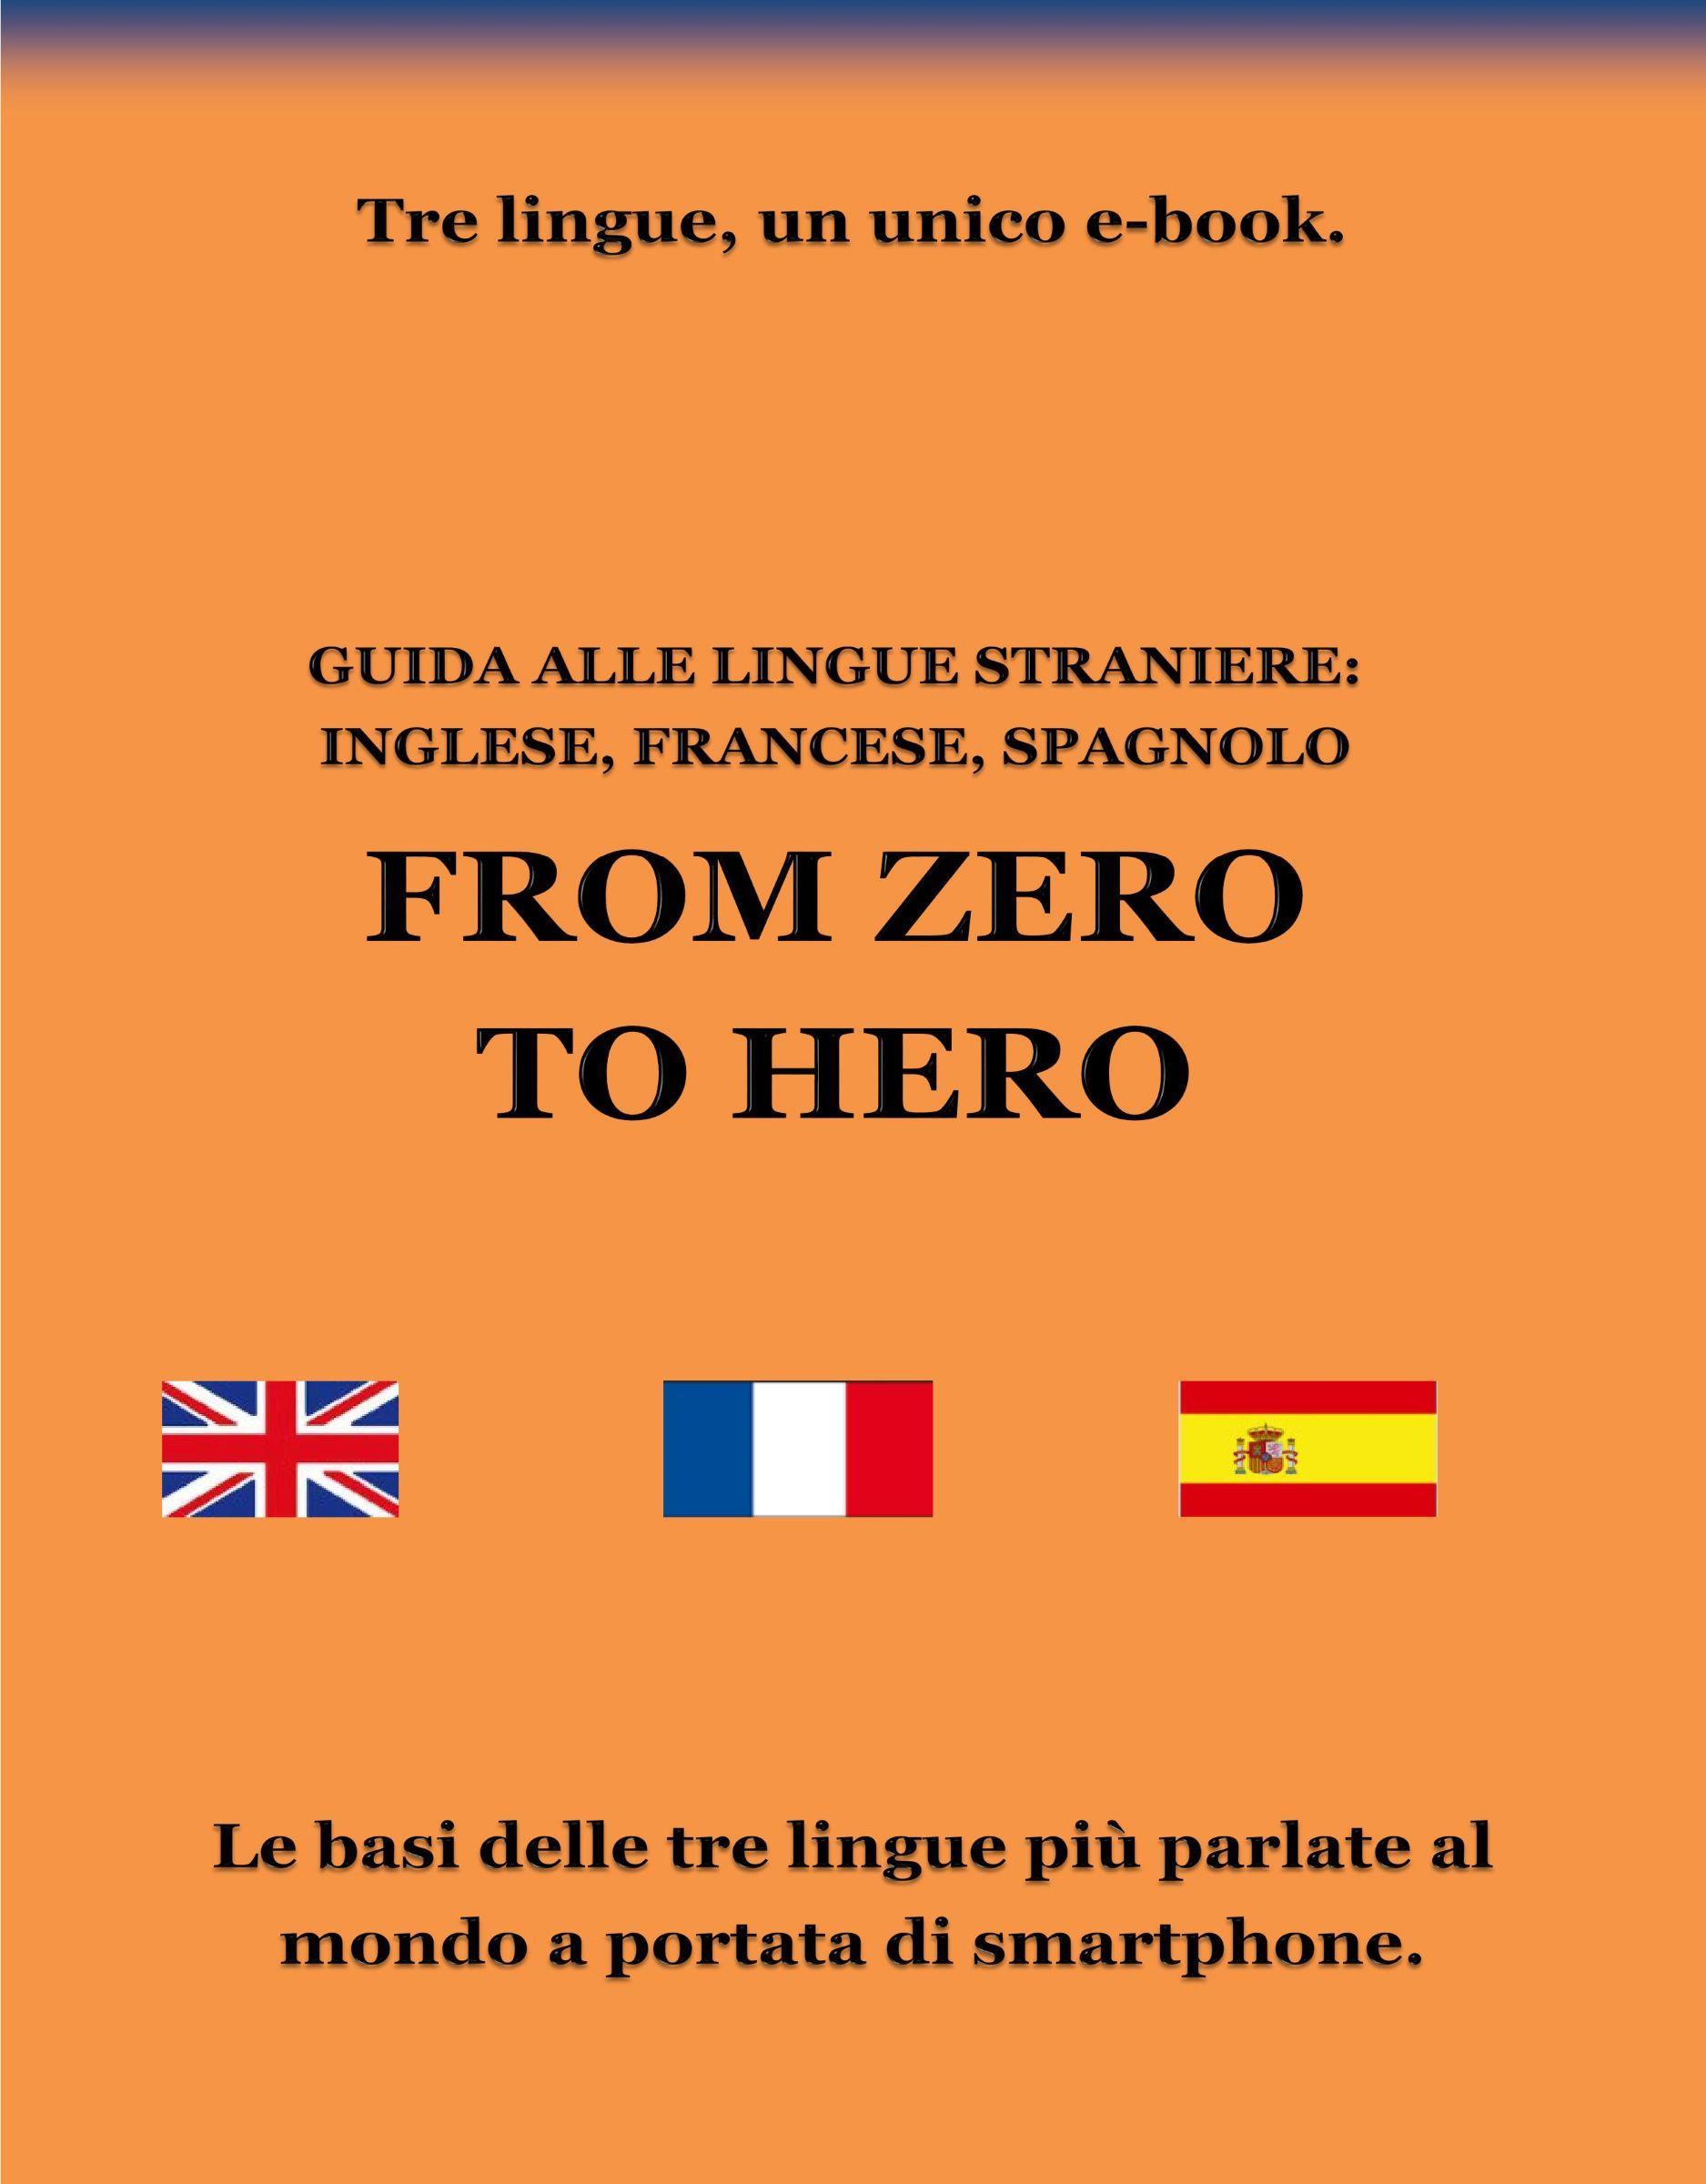 Guida alle lingue straniere: inglese, francese, spagnolo